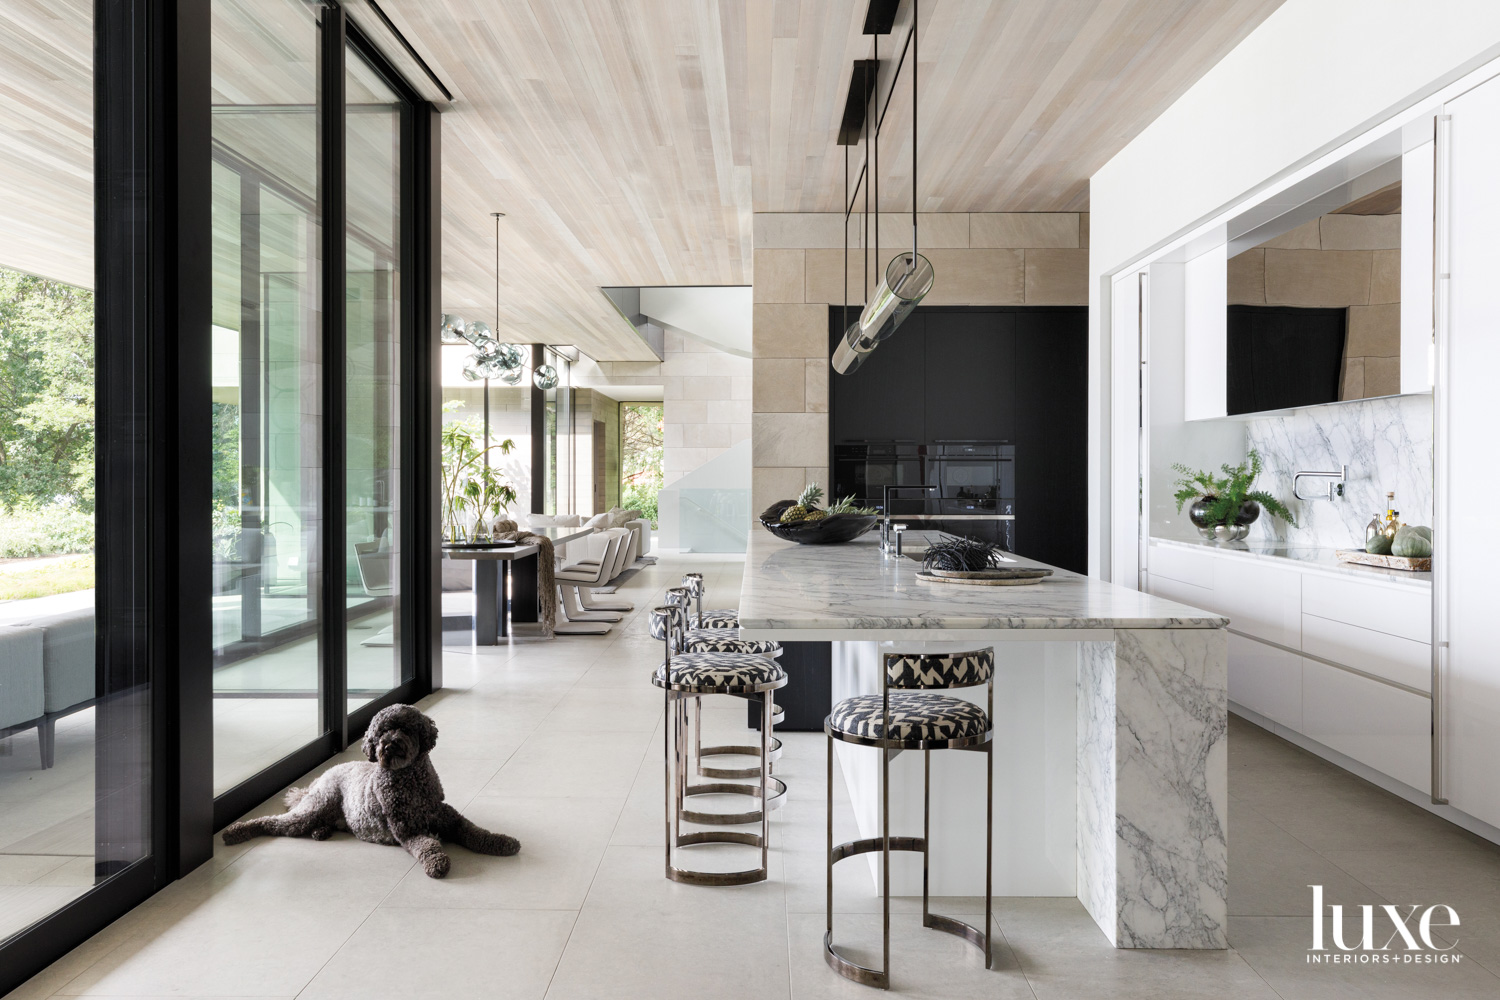 A gray-white-and-black kitchen with high-gloss...